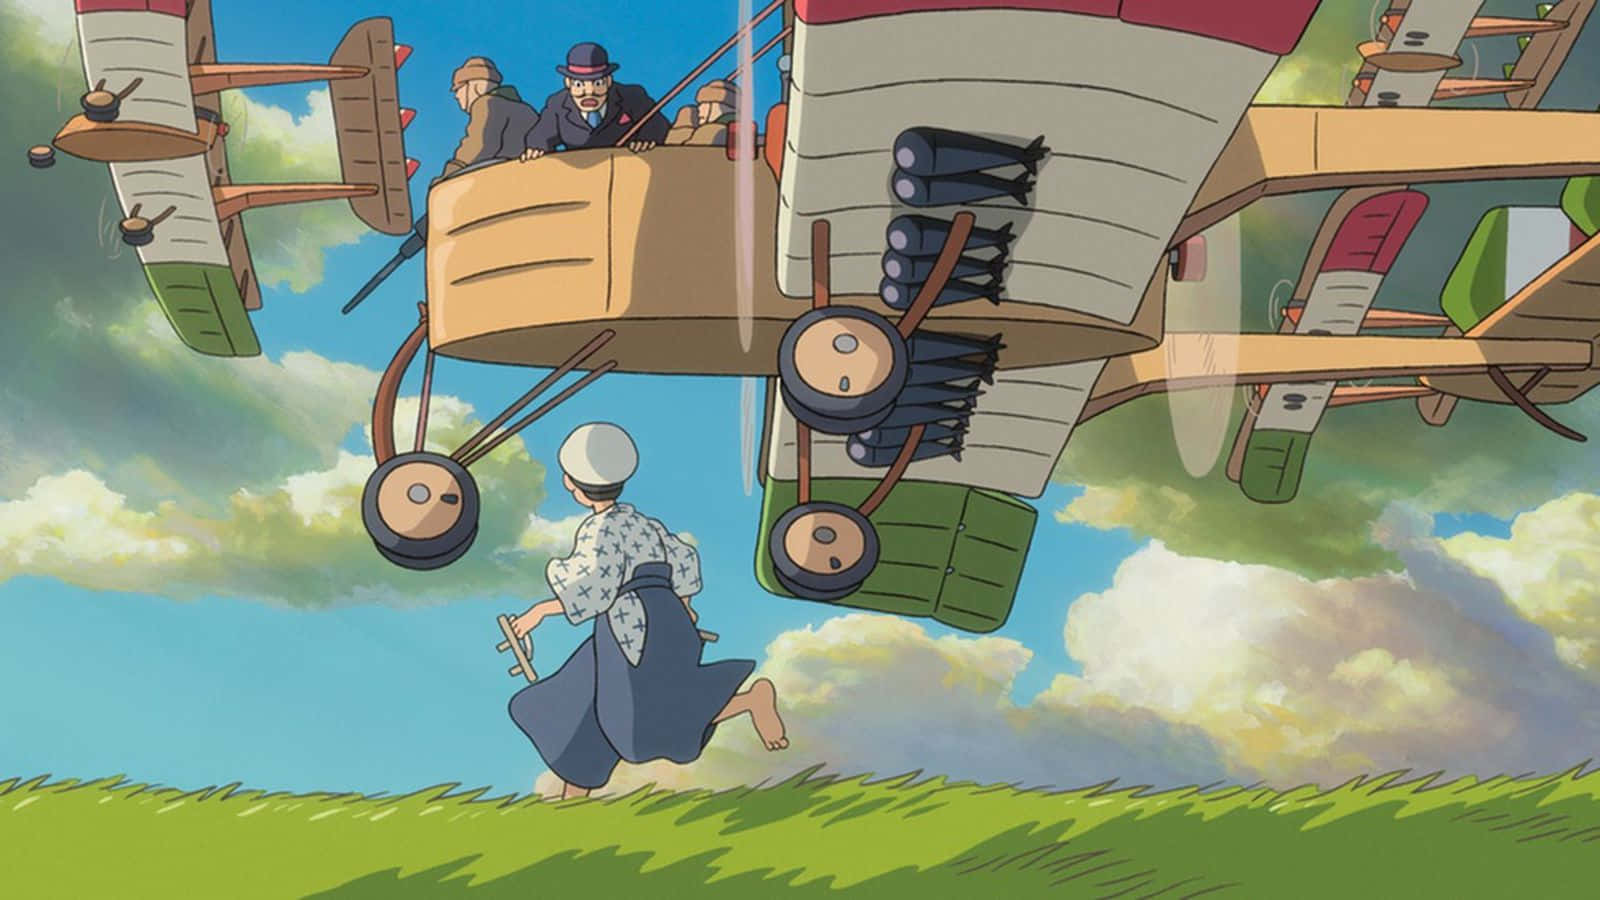 An inspirational scene from The Wind Rises Wallpaper